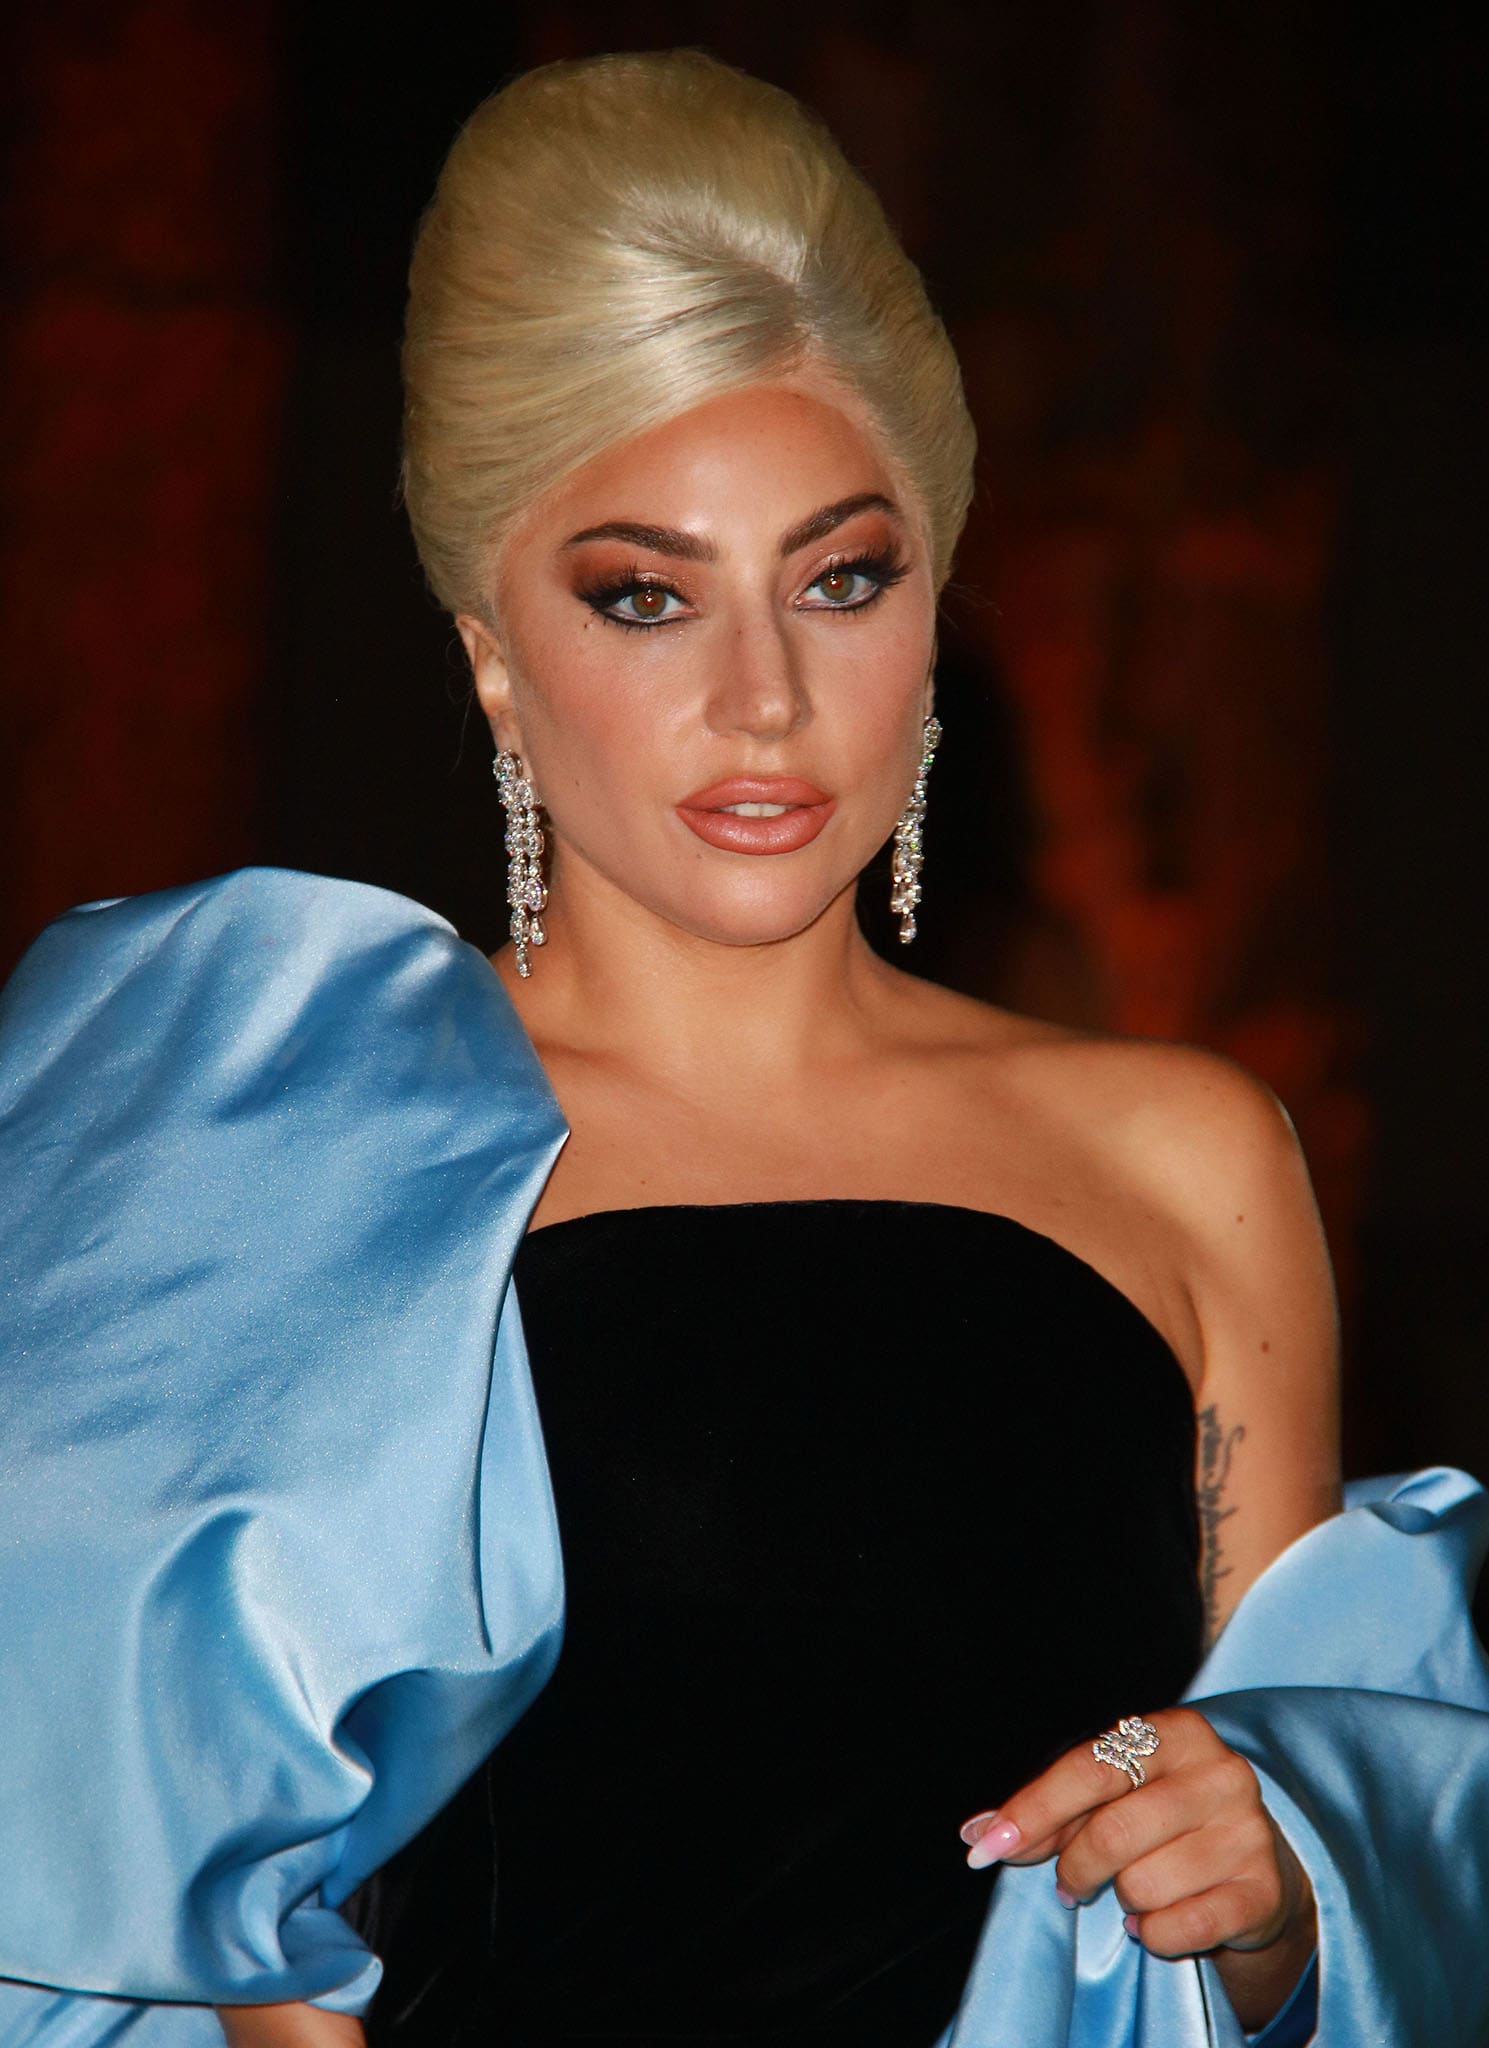 Lady Gaga continues her '60s-inspired look with a beehive hairstyle and smokey eye-makeup